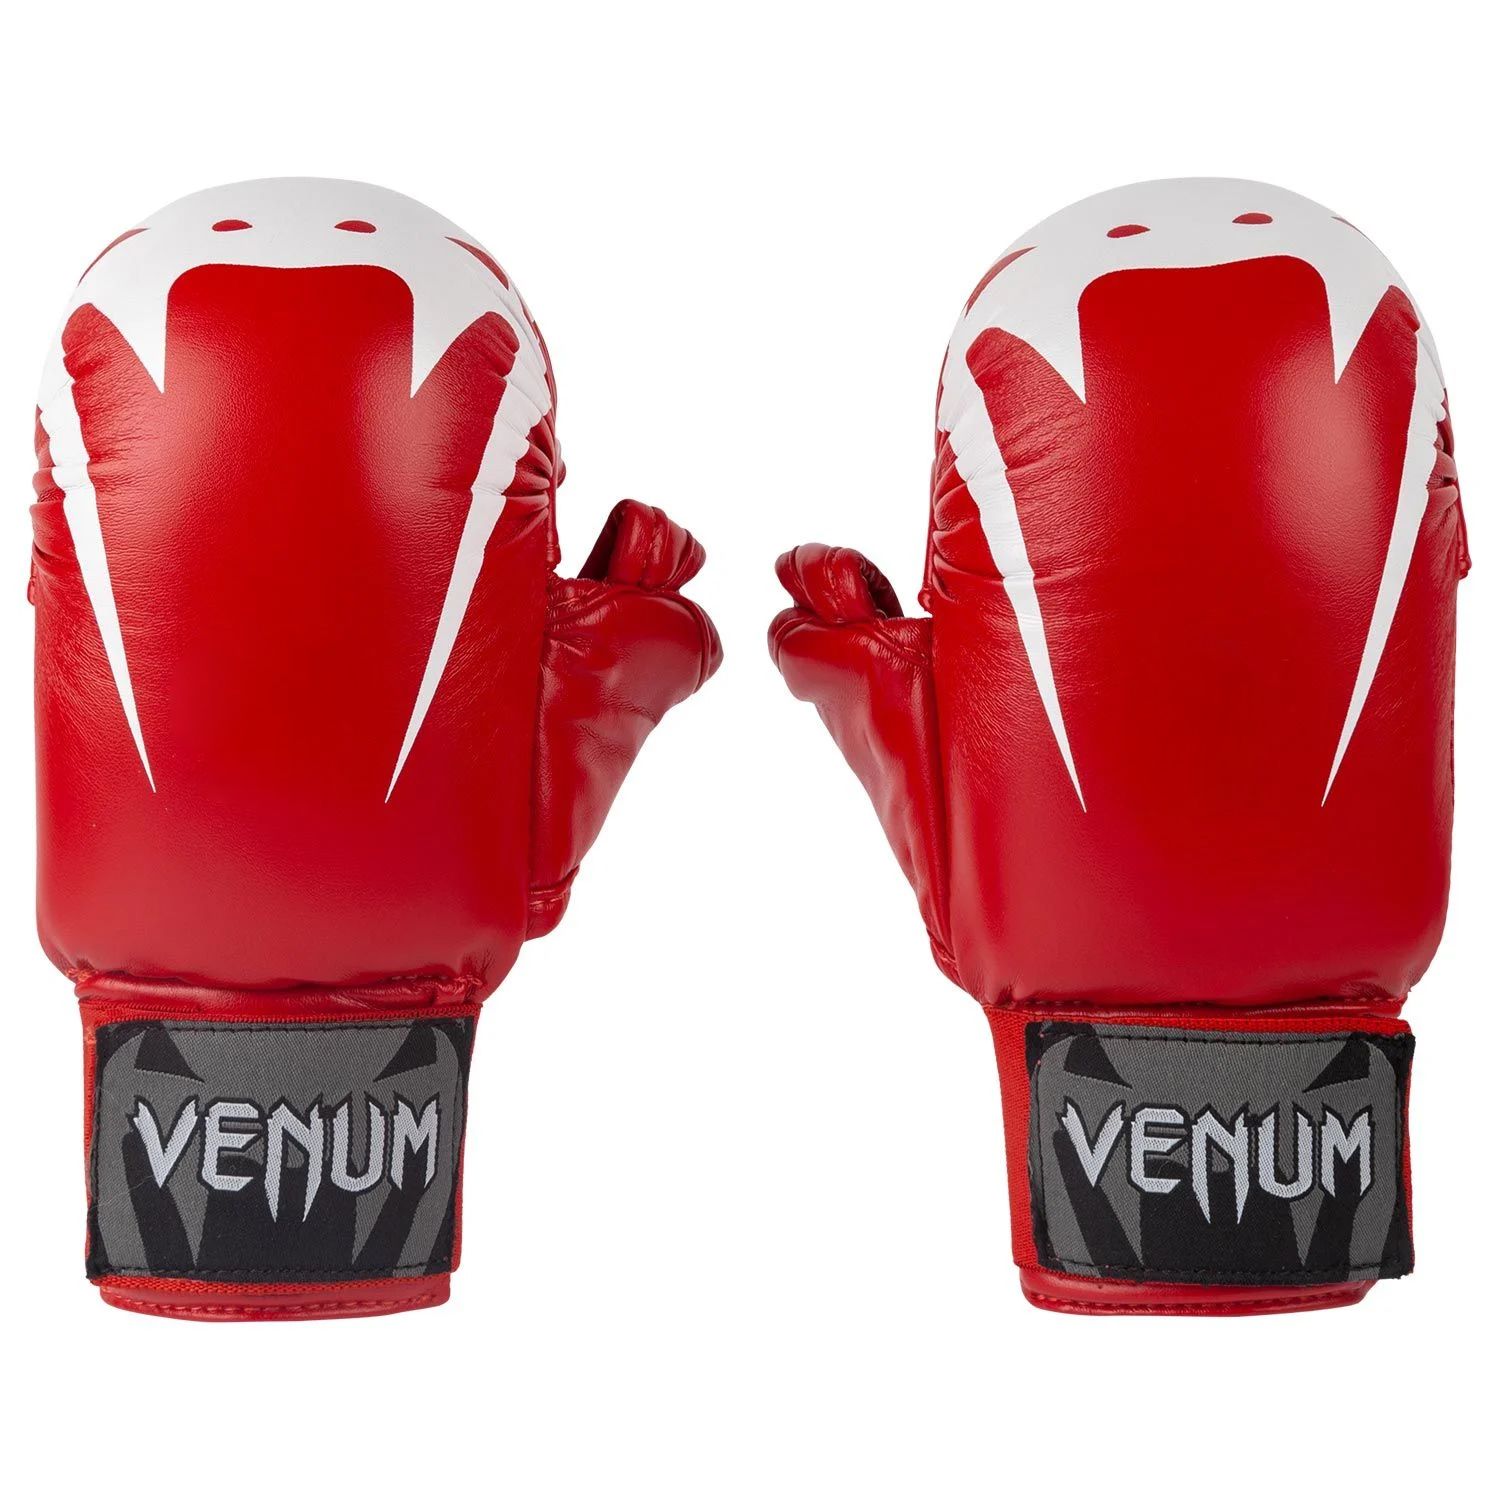 Venum Giant Karate Mitts - With Thumbs  - Red